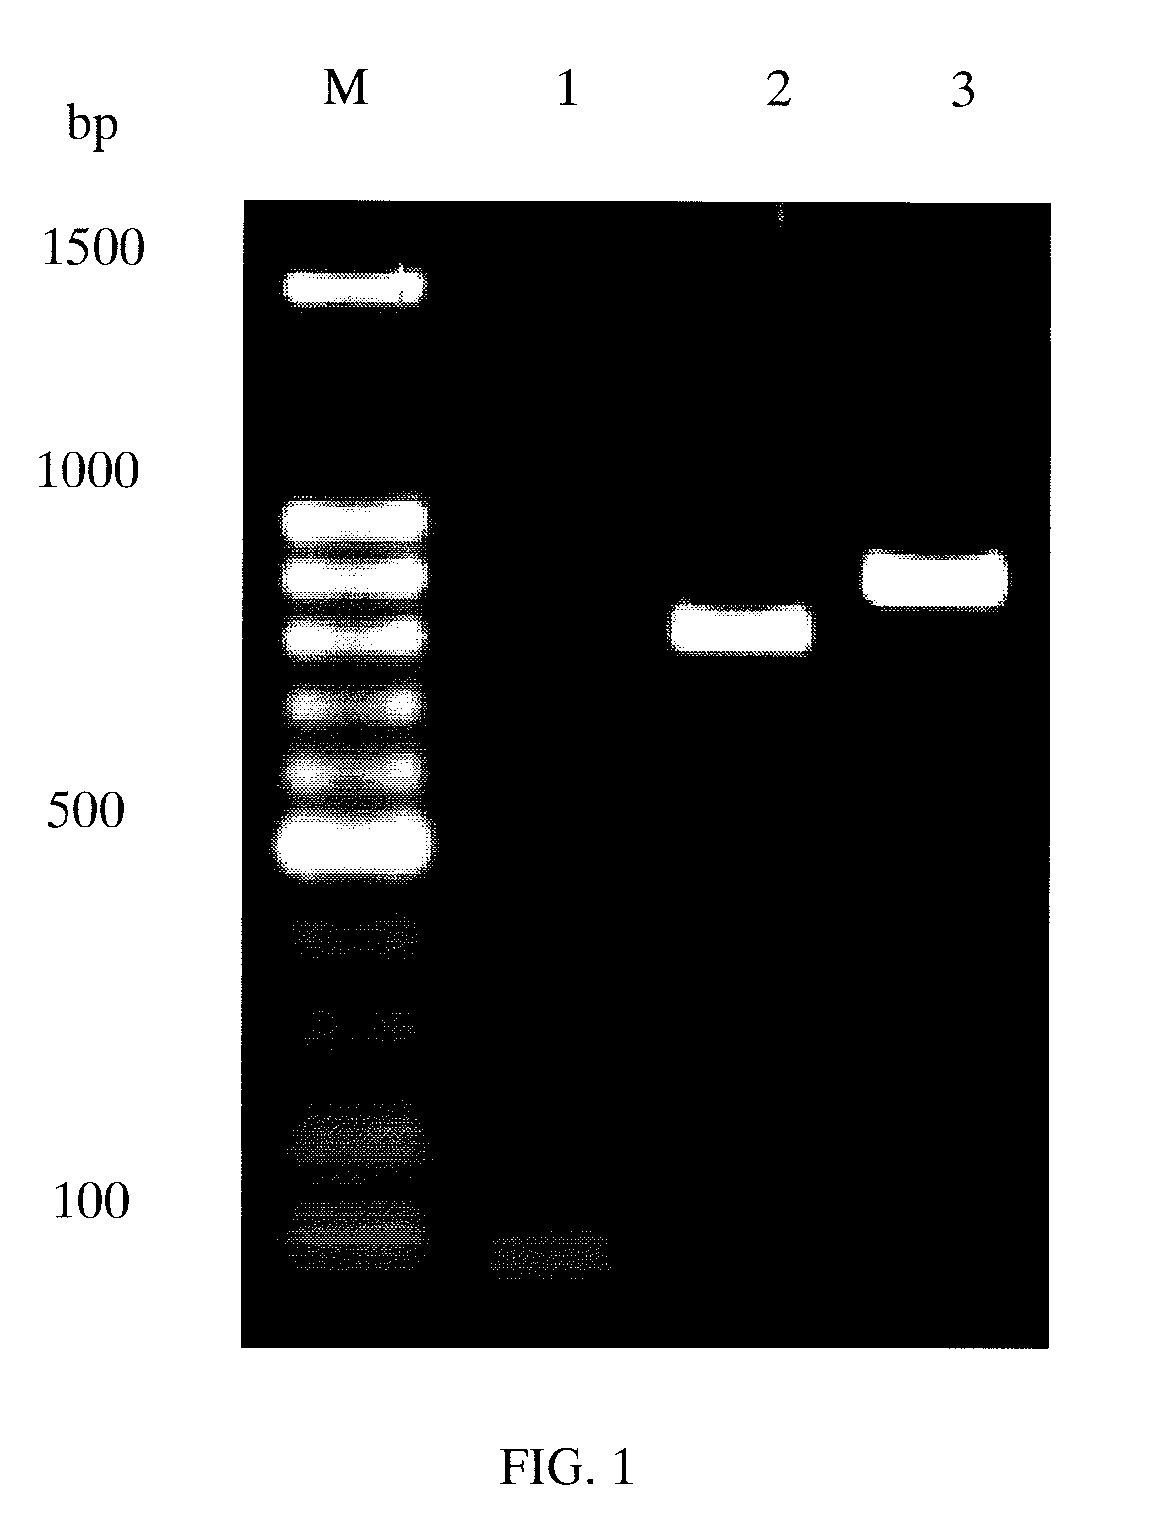 Recombinant chimeric protein of neutrophil inhibitory factor and hirugen, and pharmaceutical composition thereof